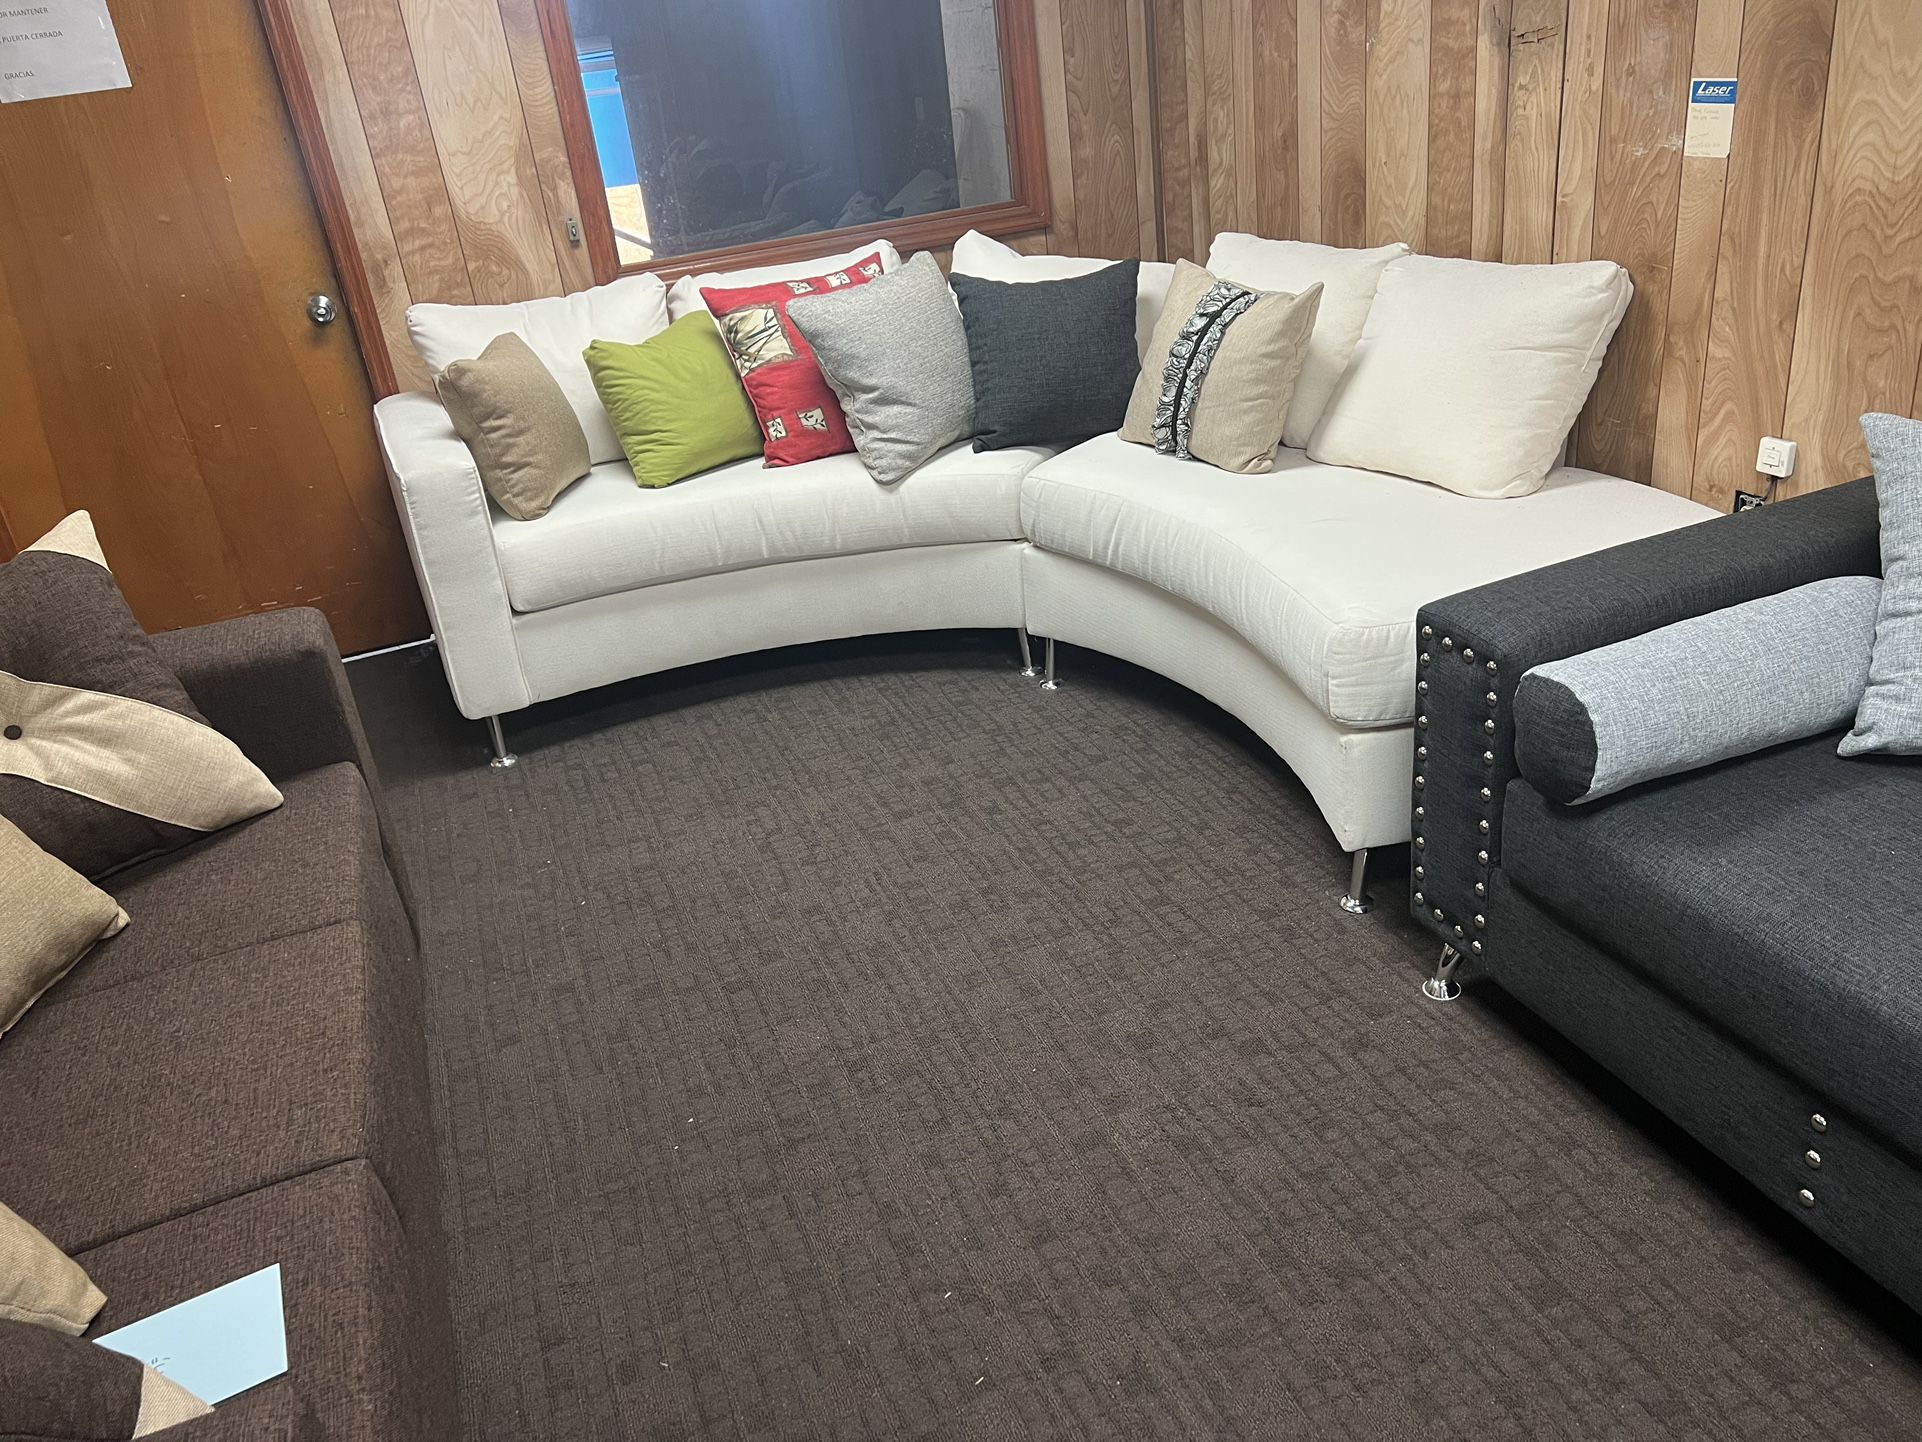 Brand new sectional $1000, gray or white